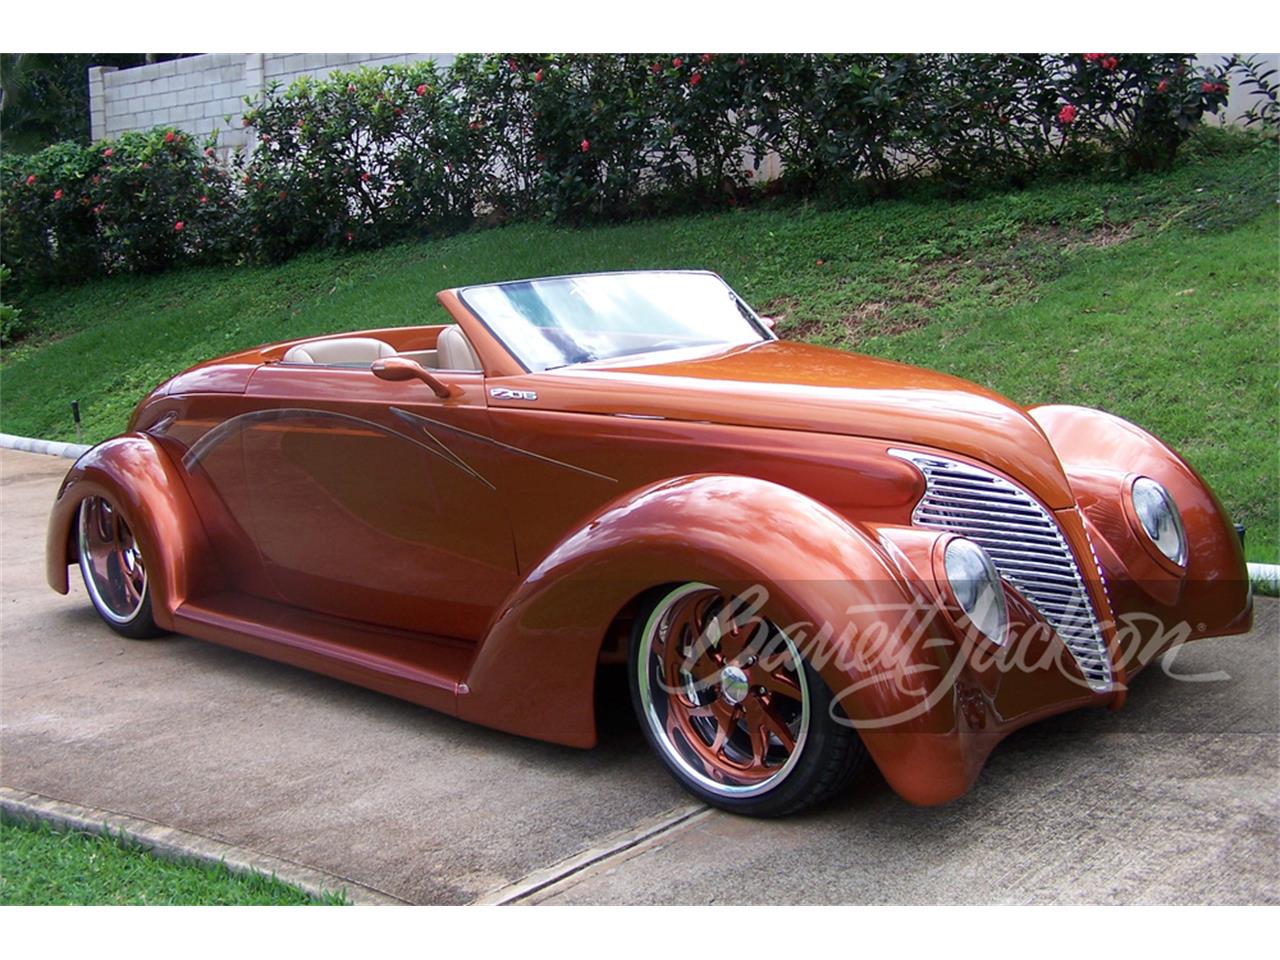 For Sale at Auction: 1939 Ford Custom in Scottsdale, Arizona for sale in Scottsdale, AZ